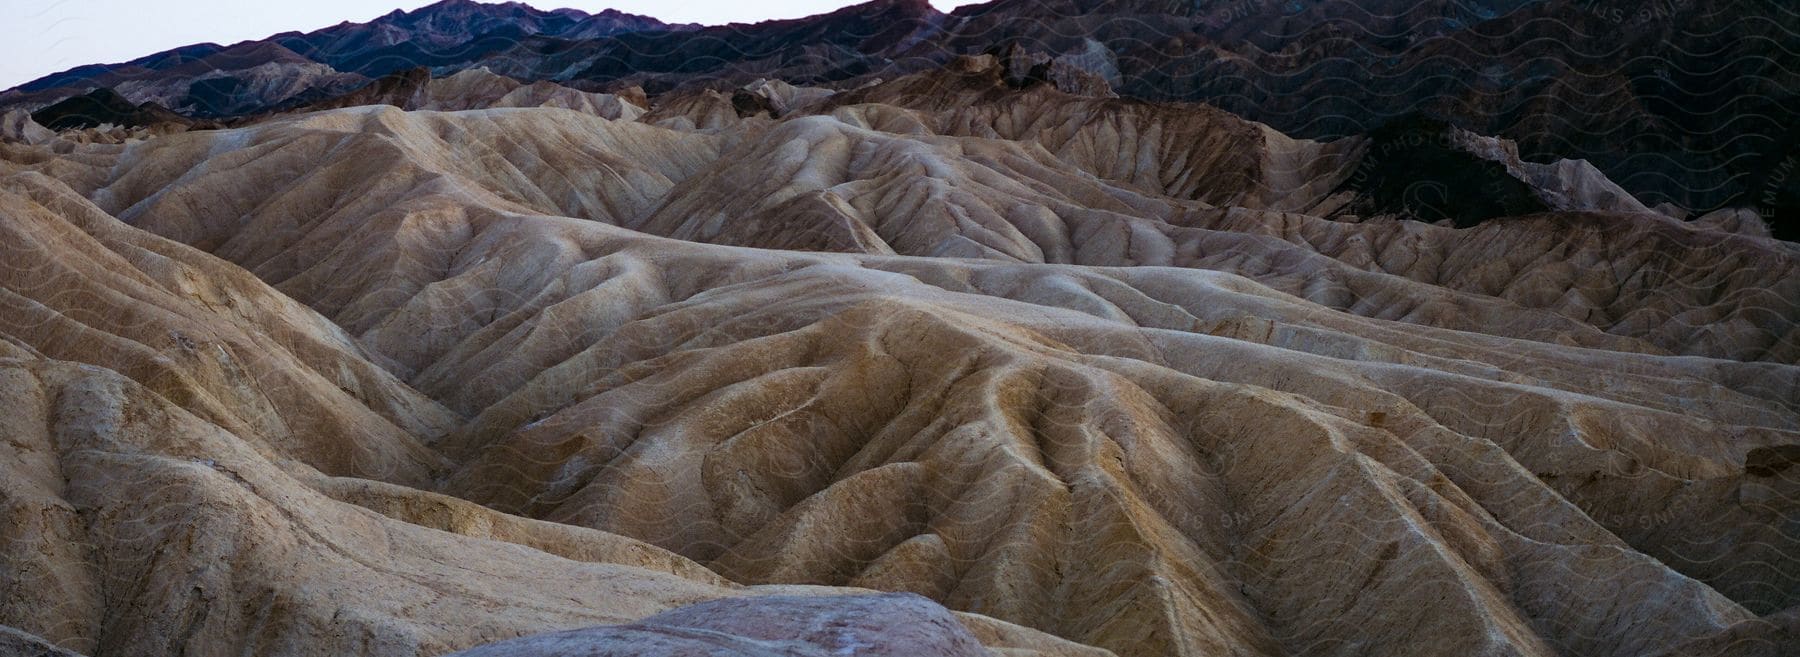 Low rippling sandcolored mountains in the american desert